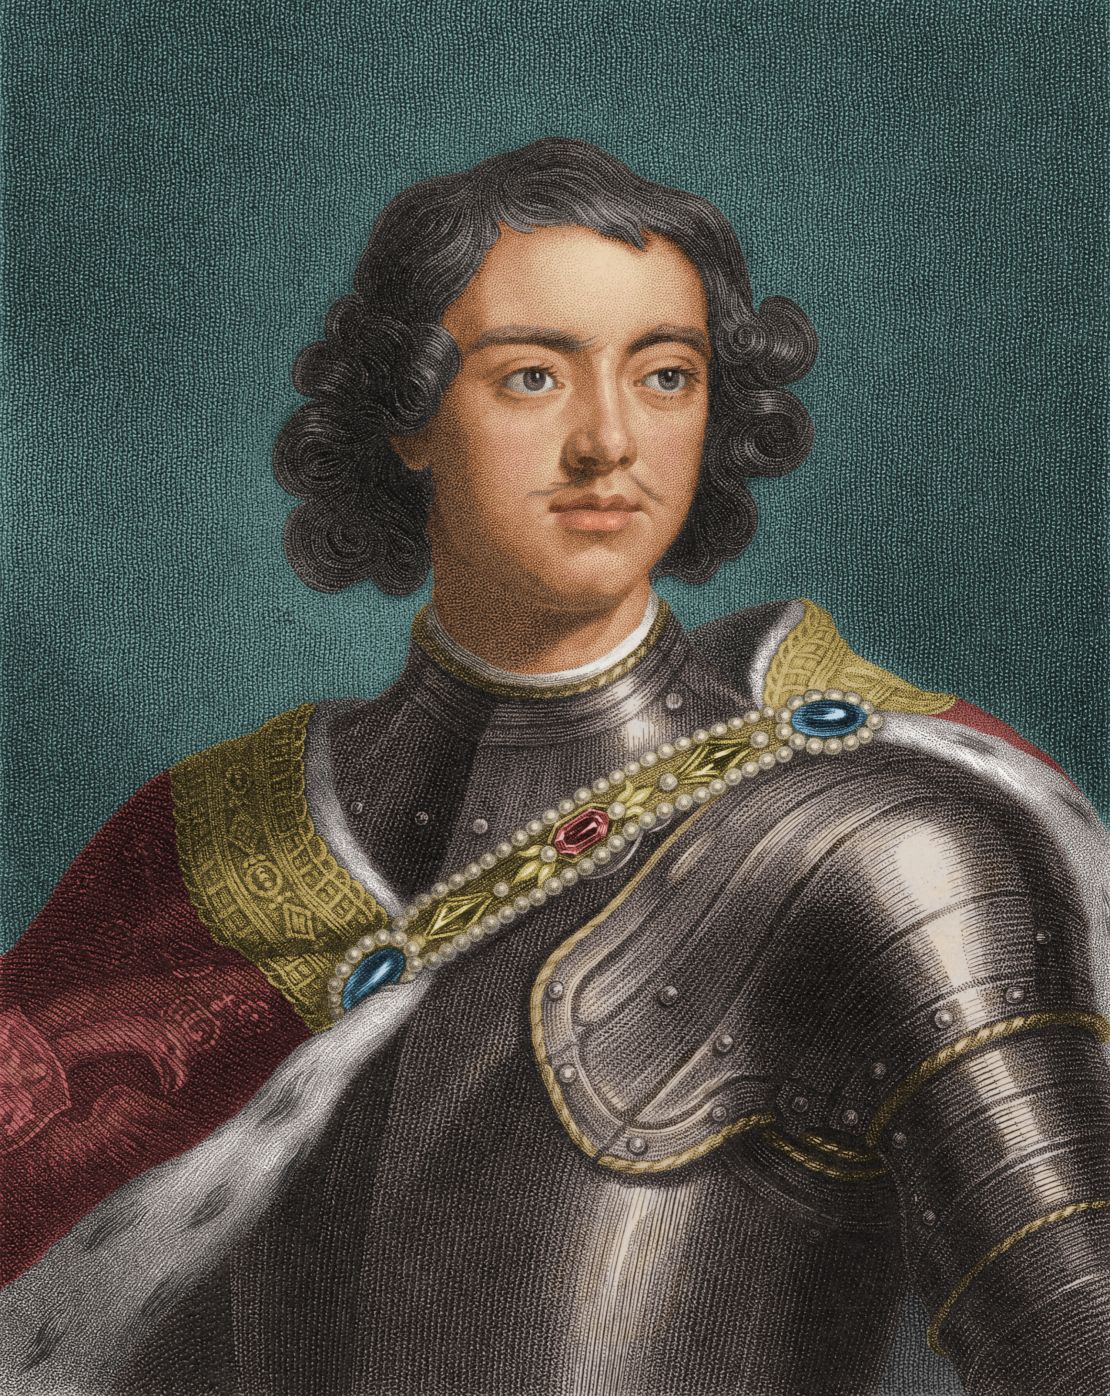 A portrait from circa 1700 shows Peter I, who ruled Russia as Peter the Great from 1682 until his death in 1725. 